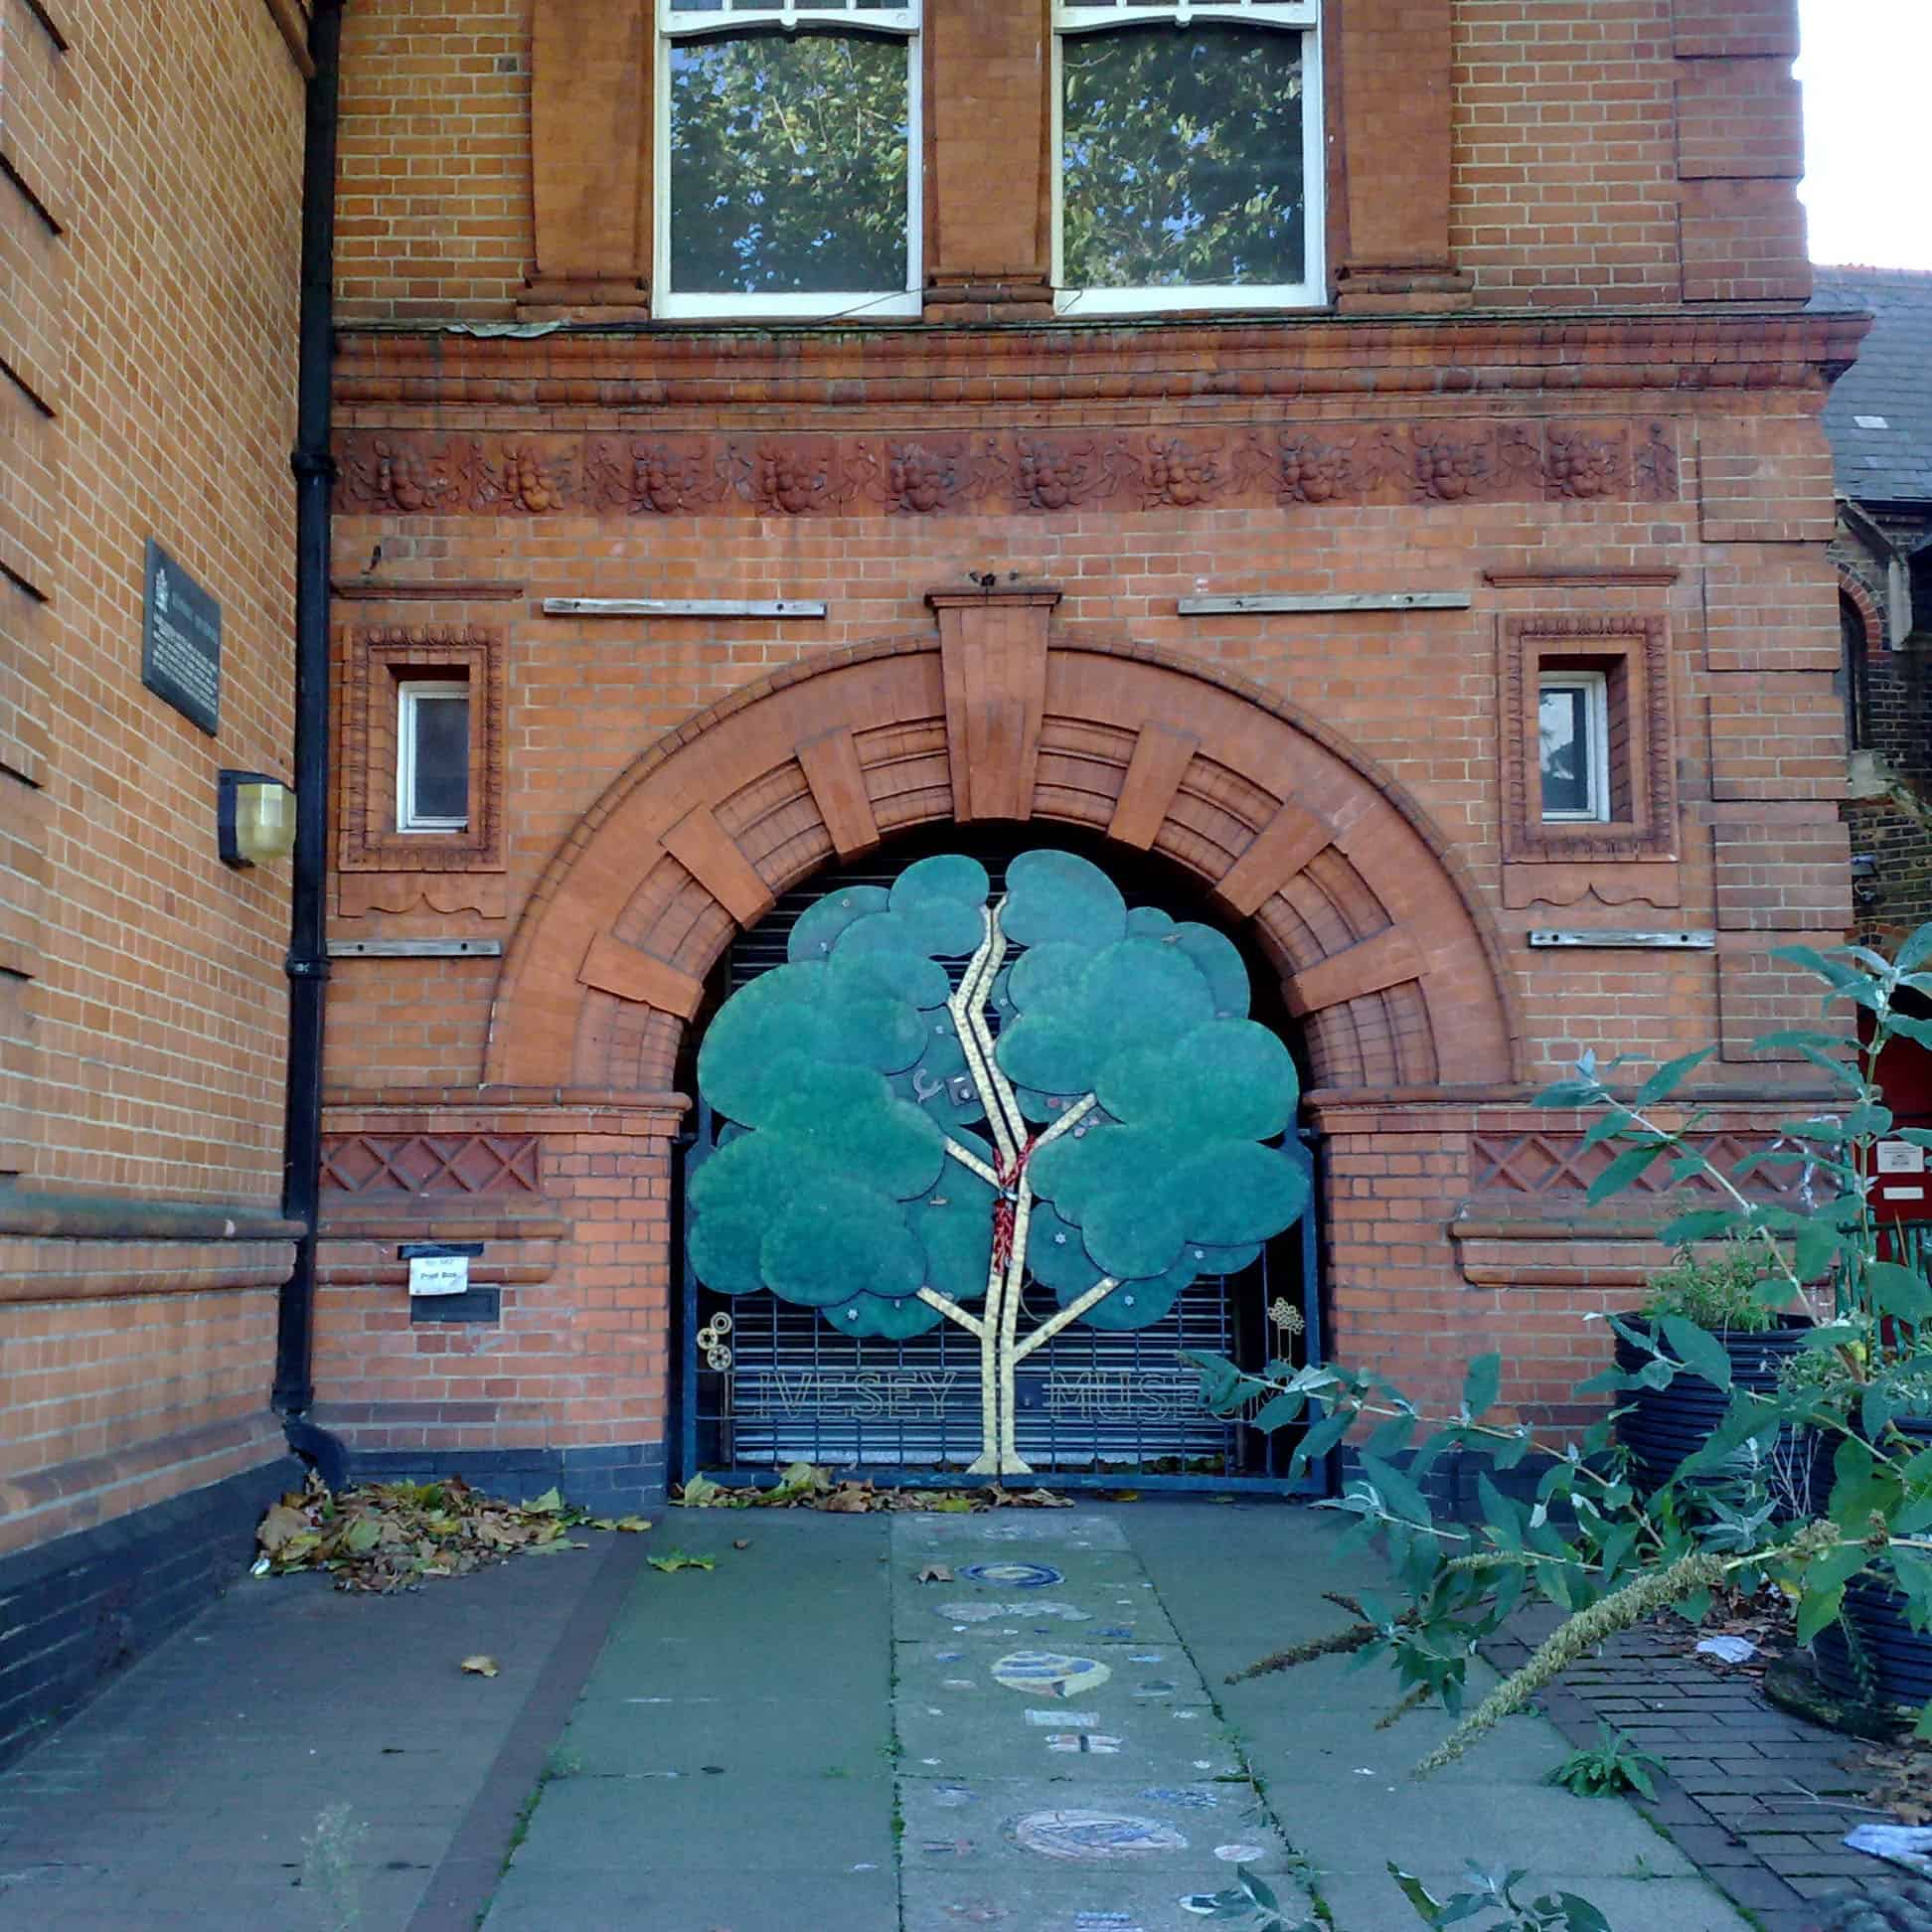 Livesey Museum for Children (By Secretlondon - Own work, CC BY-SA 3.0, https://commons.wikimedia.org/w/index.php?curid=8476713)